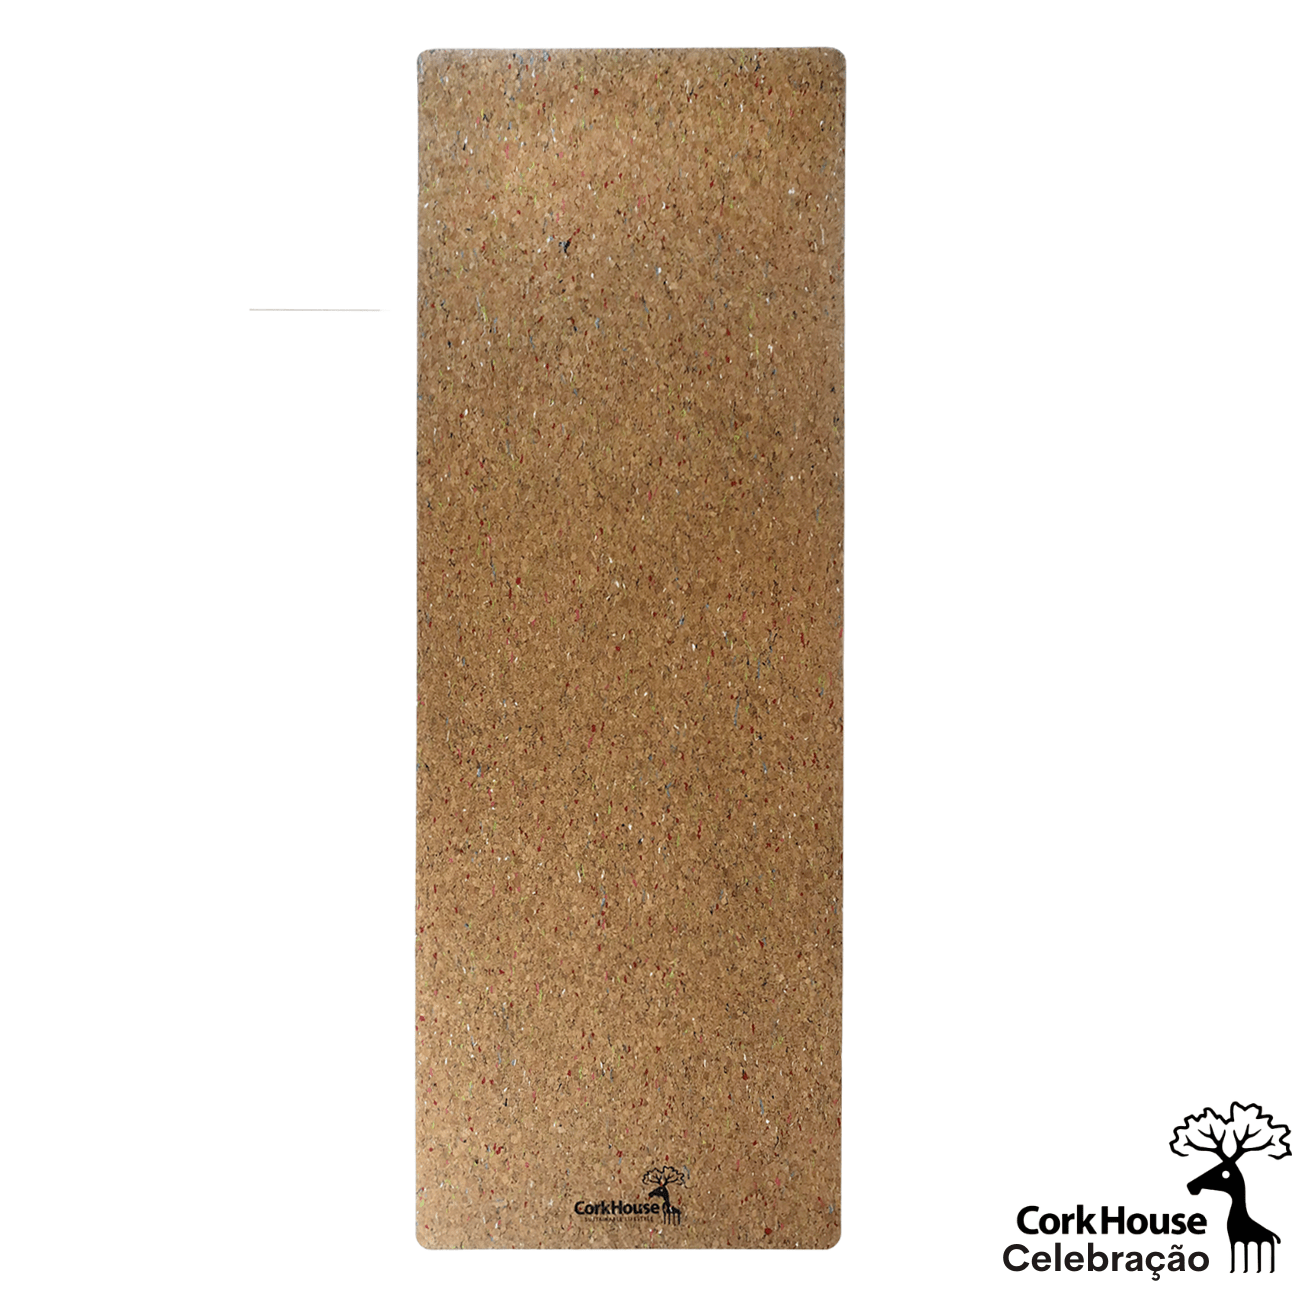 A cork yoga mat with colorful flecks in the natural cork top and a corkhouse logo at the bottom of the mat. 